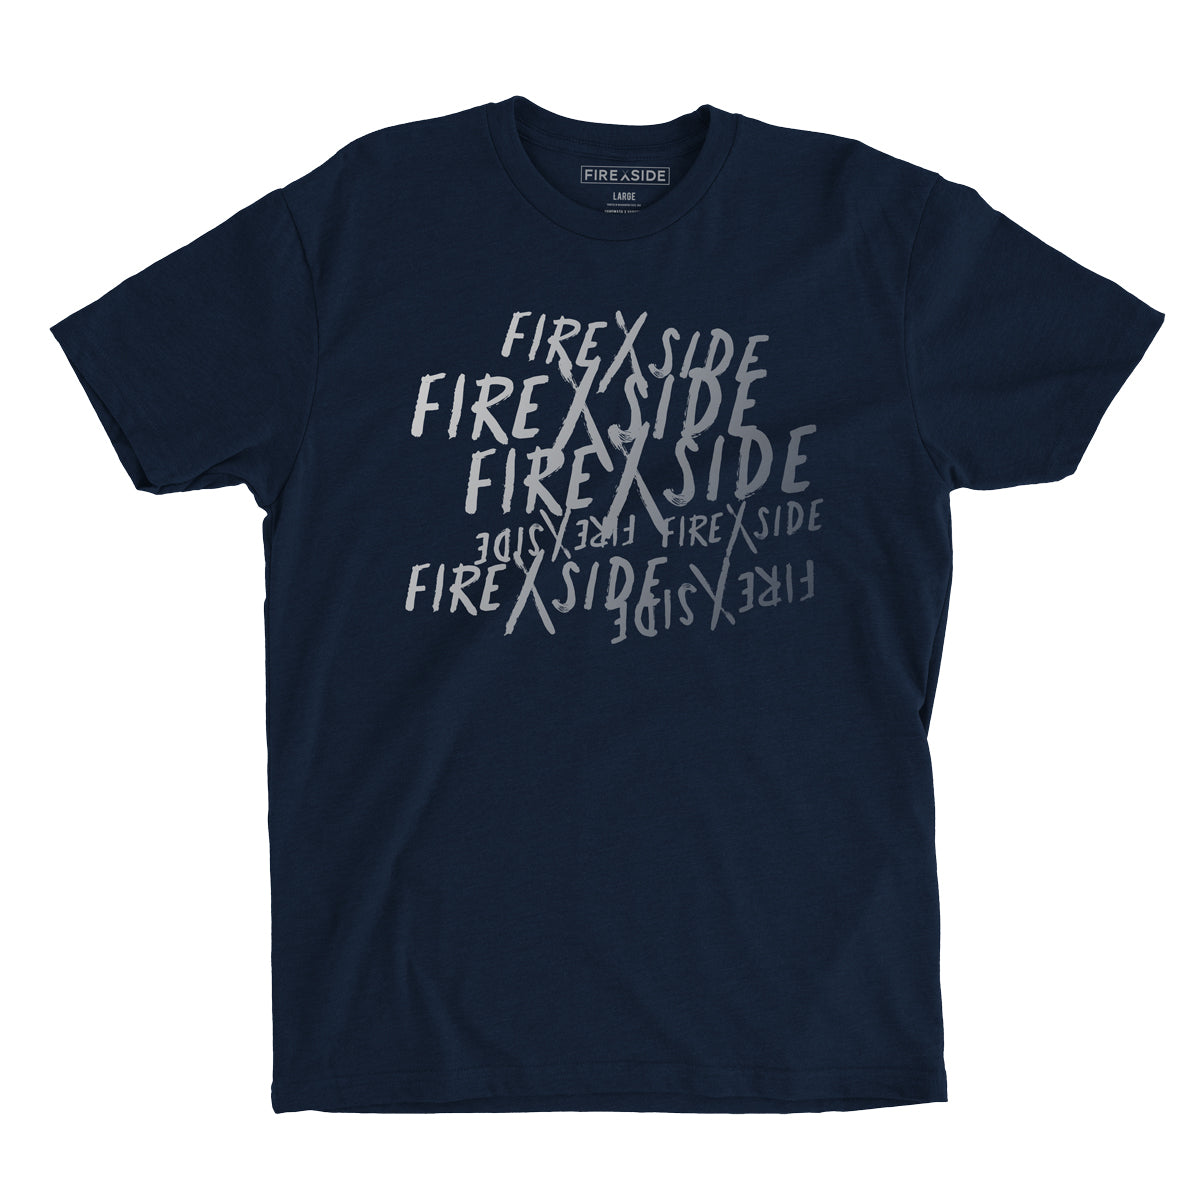 Repeater Tee - Navy - FIREXSIDE 